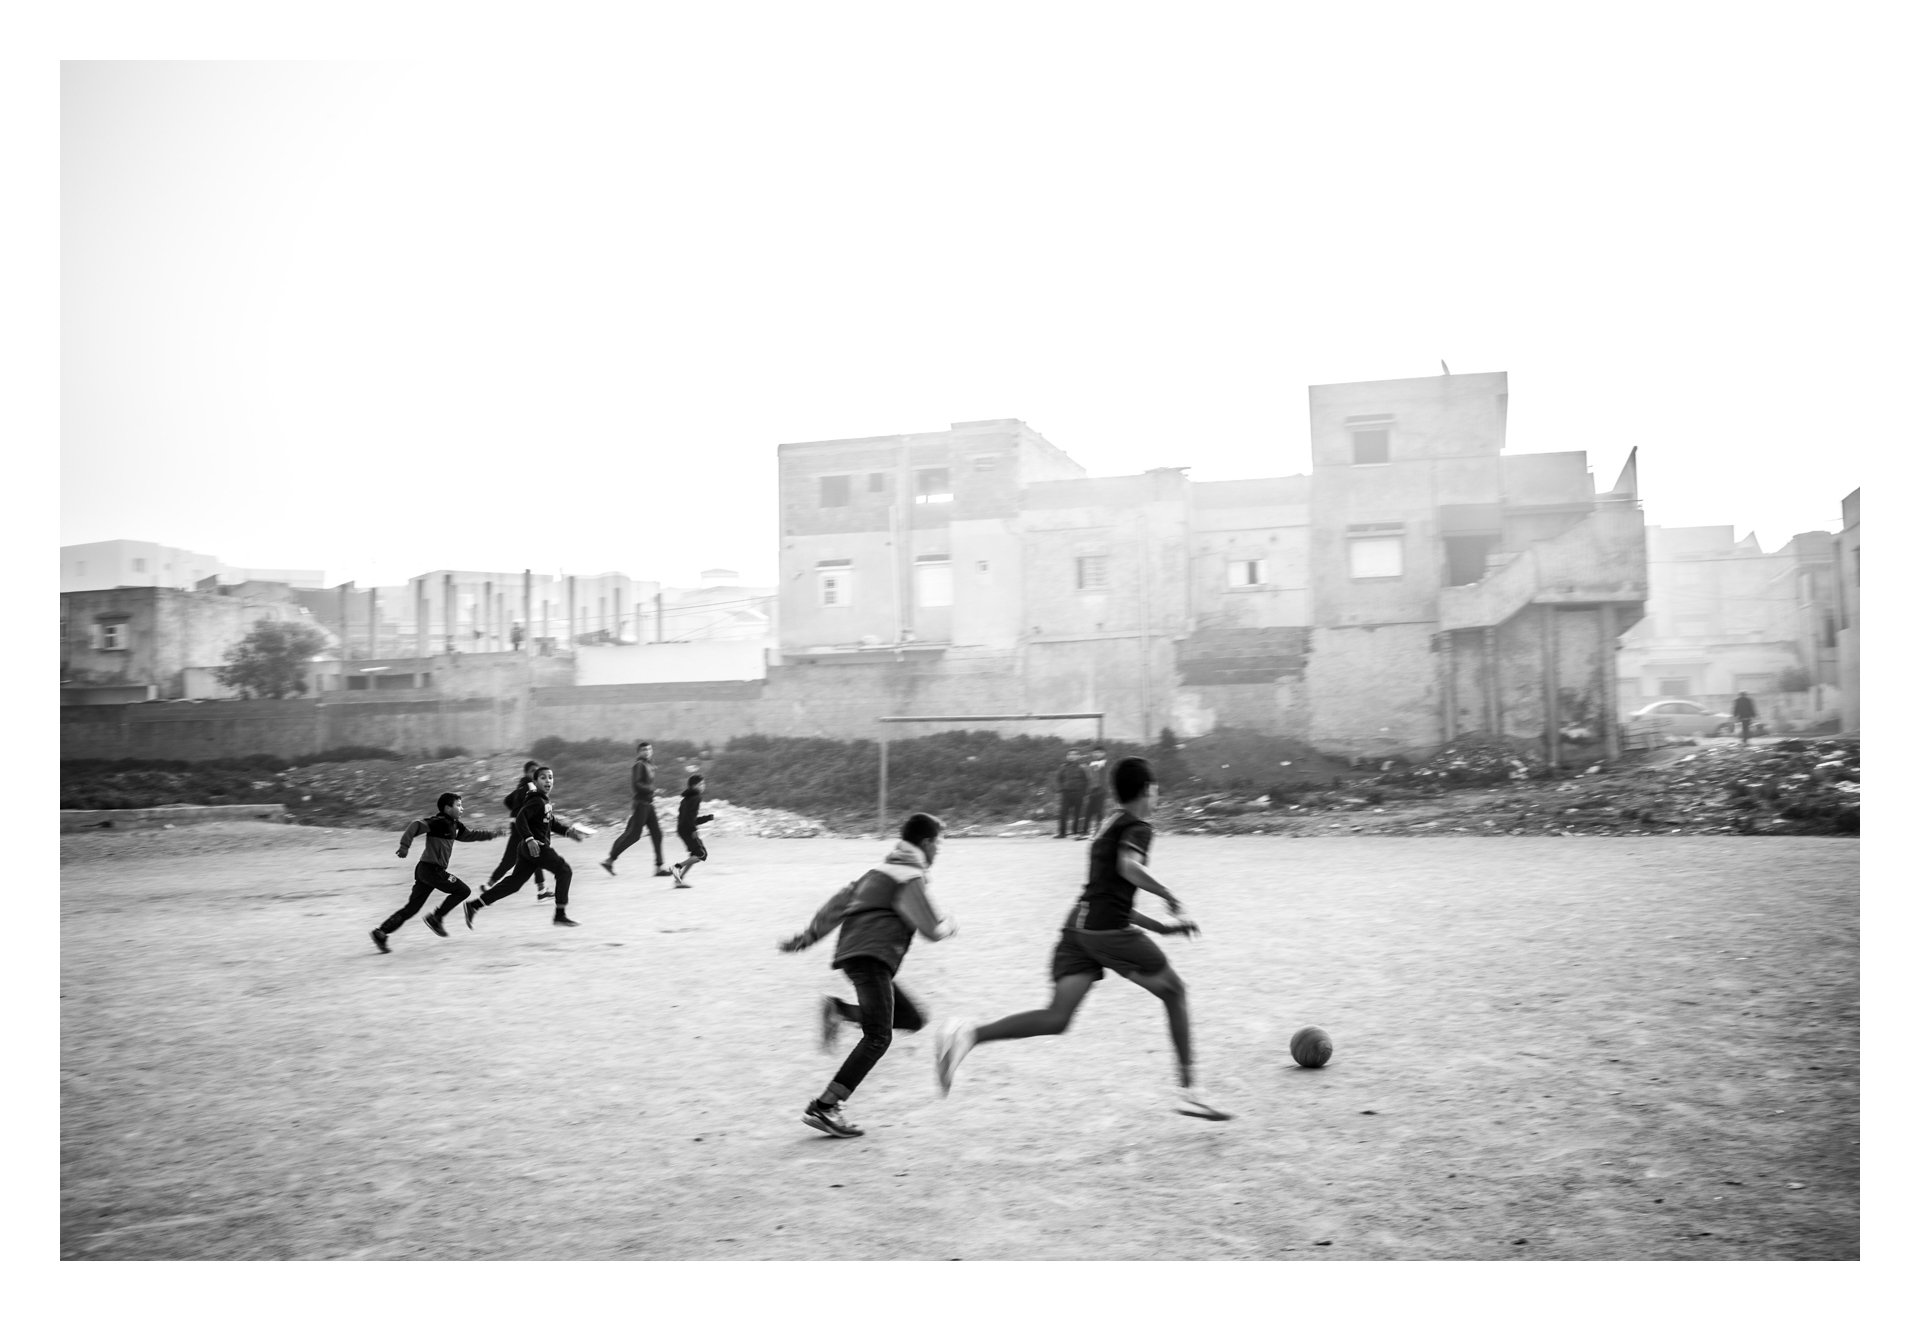  Tunisia, Tunis, Douar Hicher, 21 December 2015

Kids playing soccer in Douar Hicher, an impoverished neighborhood in Tunis outskirts. Most of the young combatients joining ISIS from this country came from this area. 

After the Jasmine Revolution of